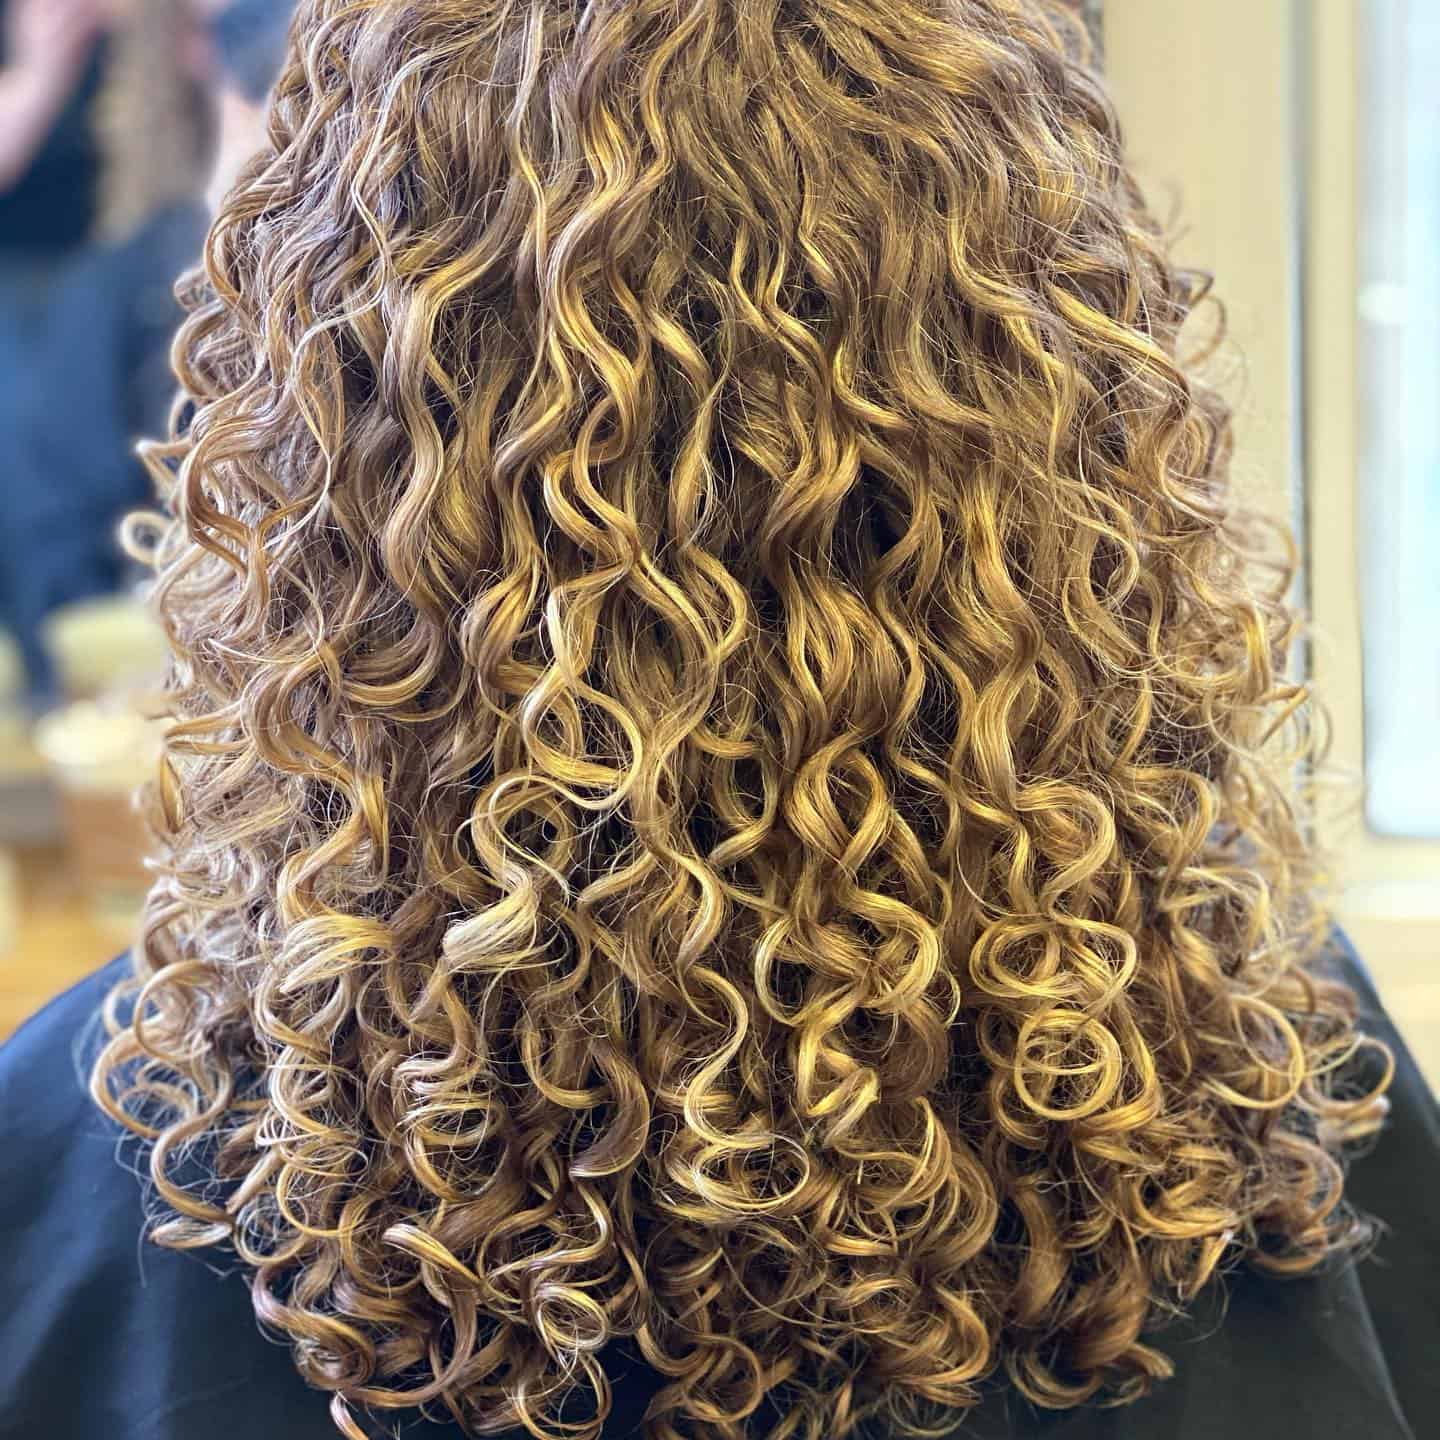 Hair Salons Near Me 20 Best Curly Hair Salons In London - Winterville